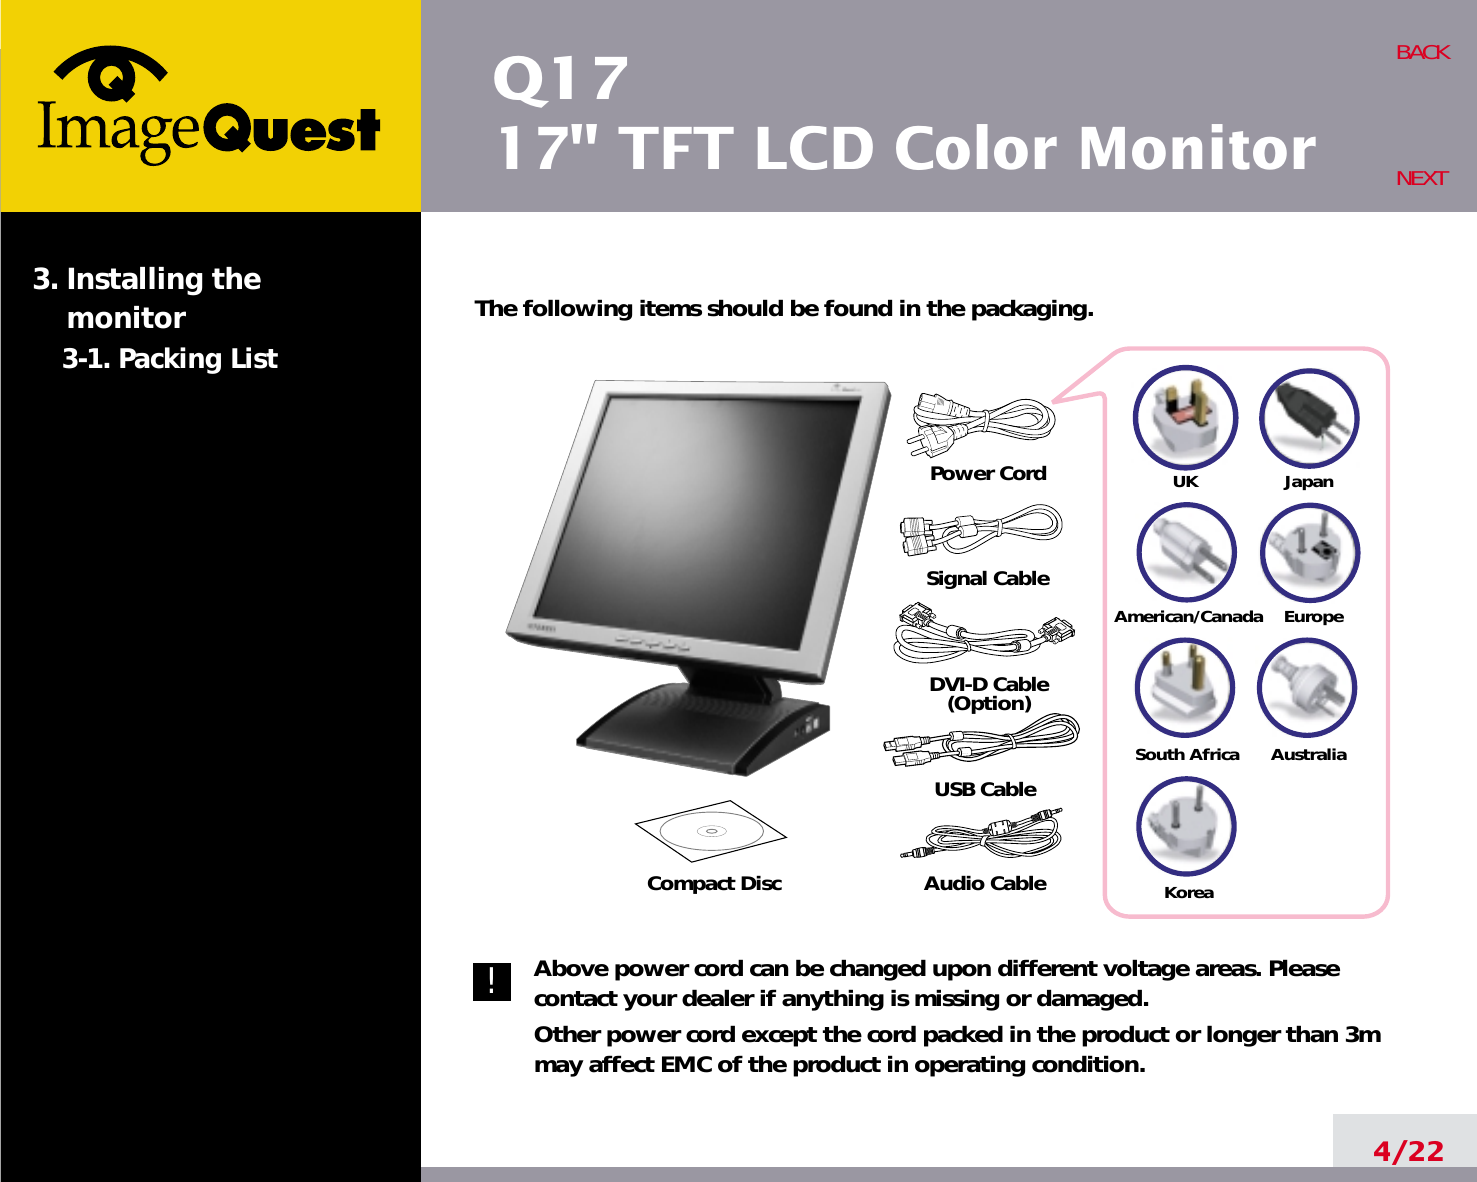 Q1717&quot; TFT LCD Color Monitor4/22BACKNEXTThe following items should be found in the packaging.Above power cord can be changed upon different voltage areas. Pleasecontact your dealer if anything is missing or damaged.Other power cord except the cord packed in the product or longer than 3mmay affect EMC of the product in operating condition.3. Installing the monitor3-1. Packing List!UKAmerican/CanadaJapanAustraliaKoreaEuropeSouth AfricaPower CordSignal CableDVI-D Cable(Option)Compact Disc Audio CableUSB Cable